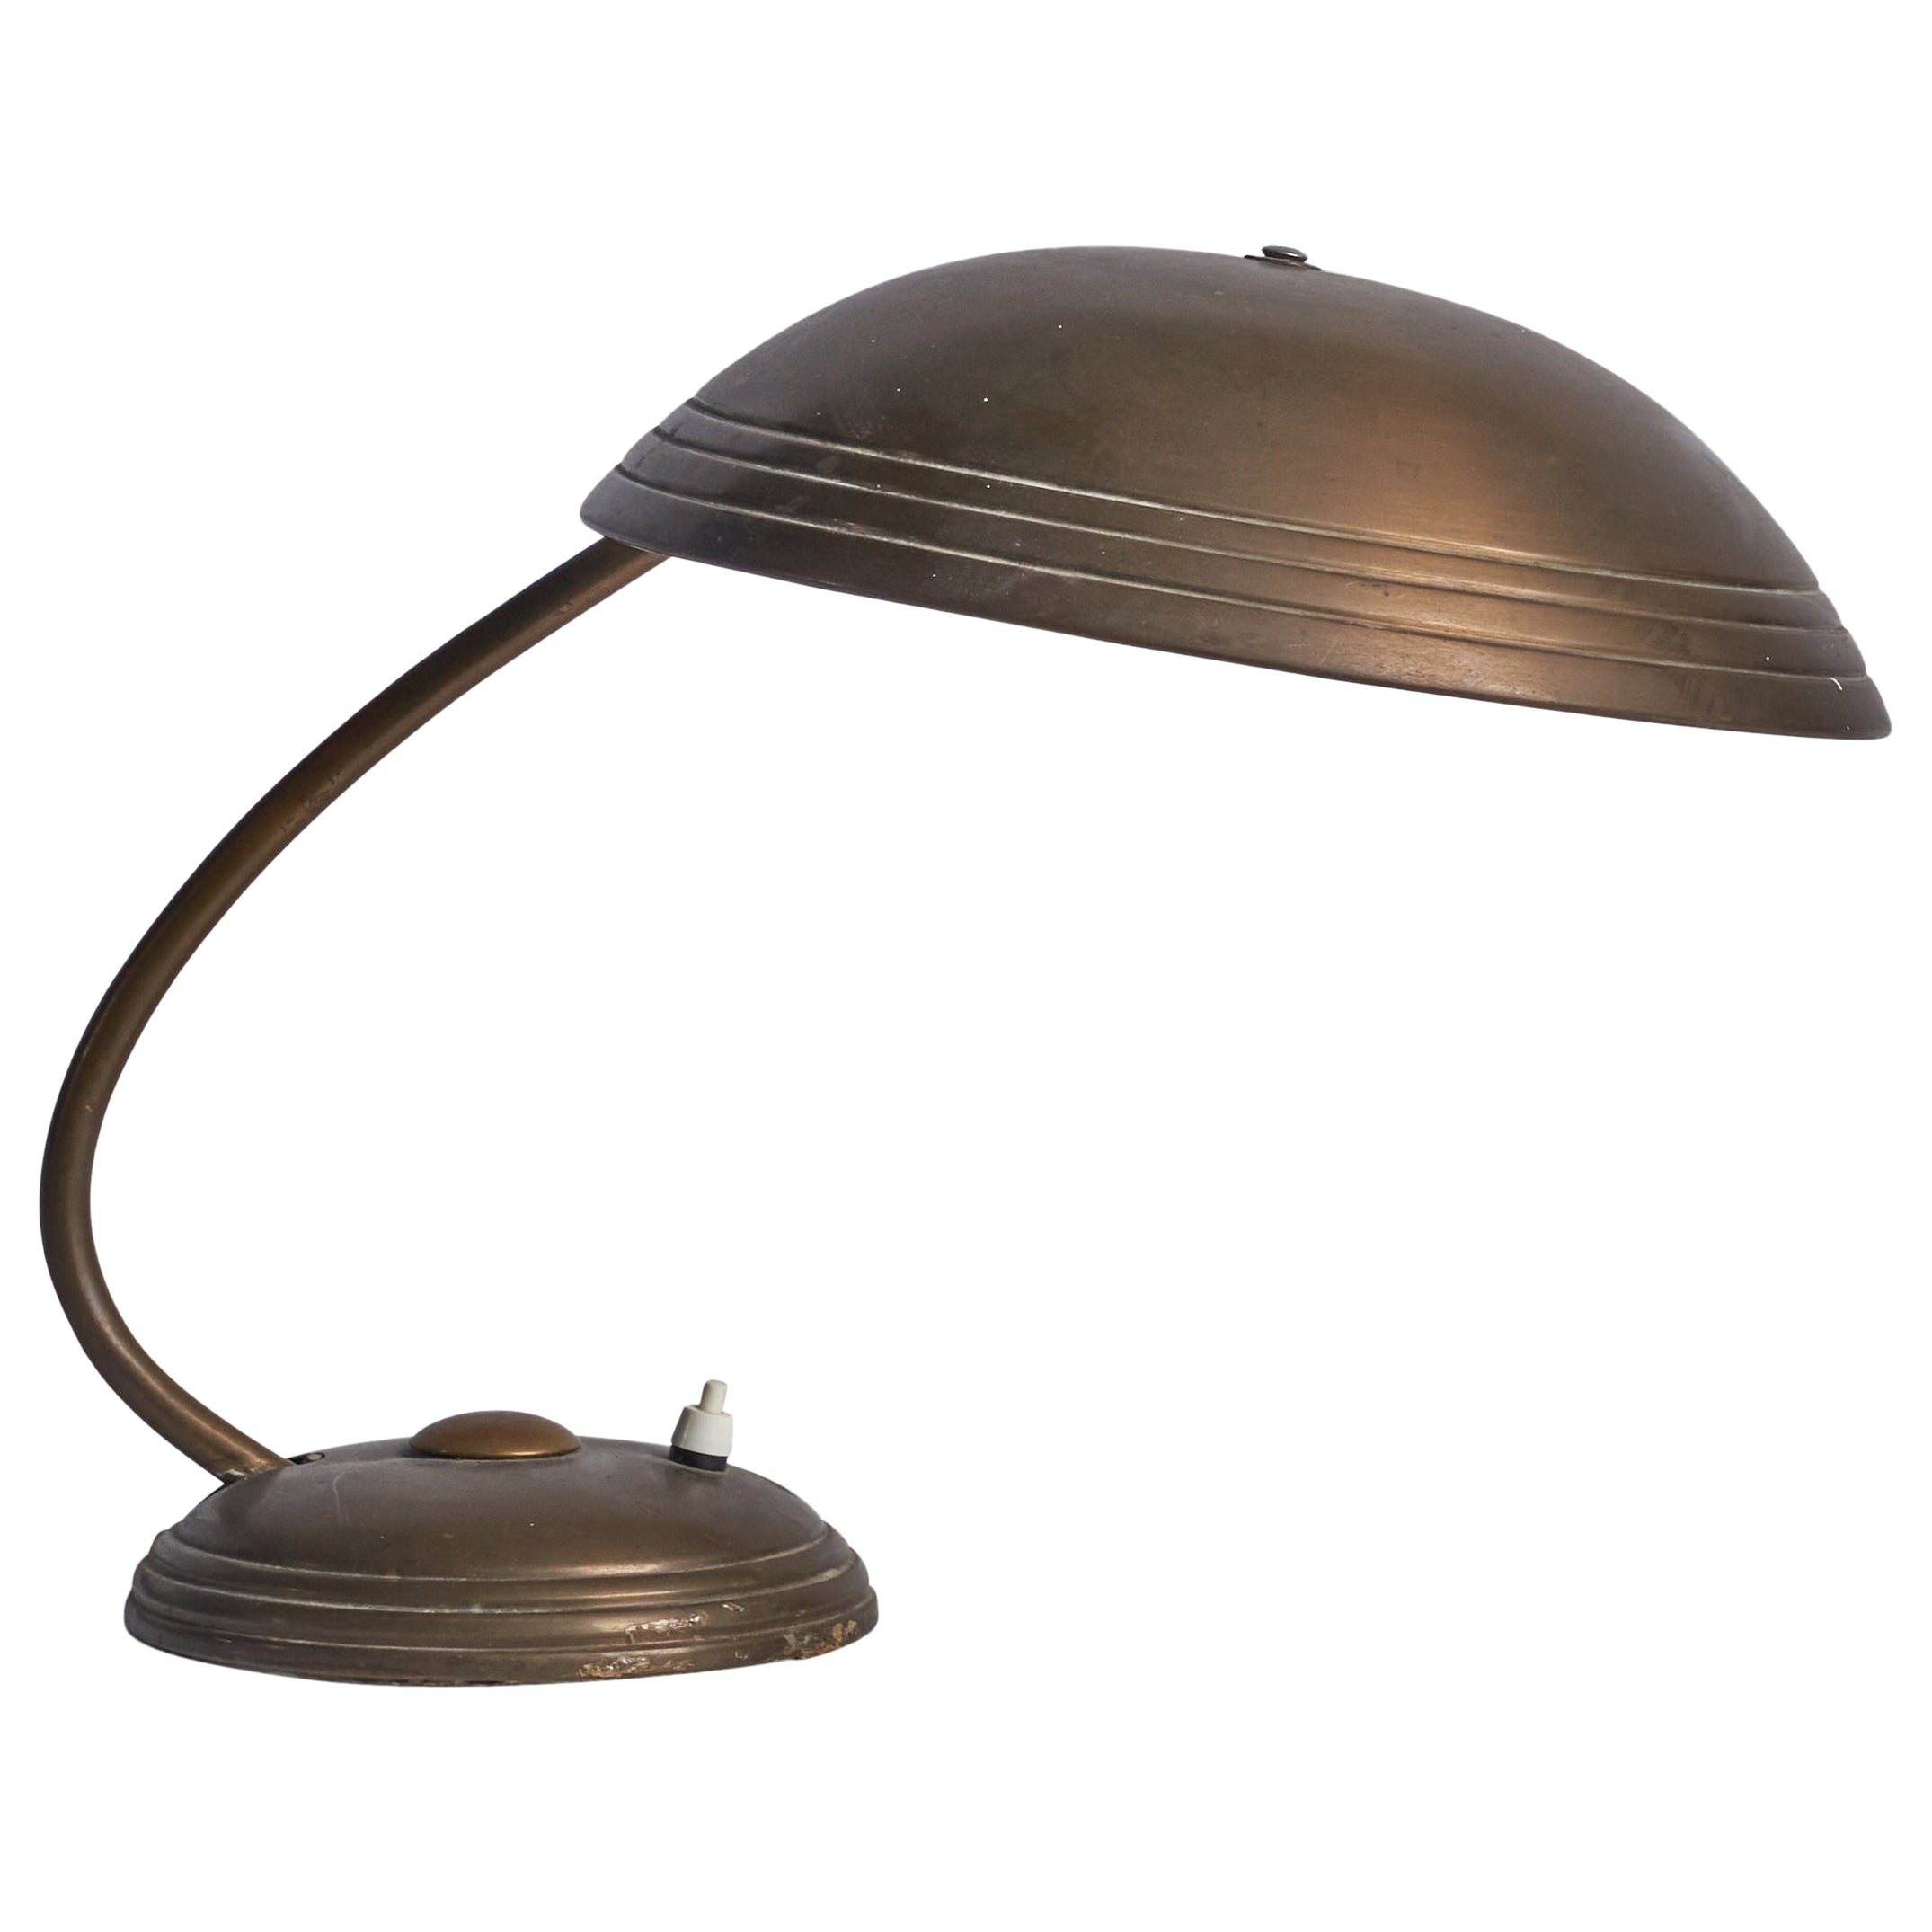 Helo Leuchten, Table Lamp, Brass, Germany, 1940s For Sale